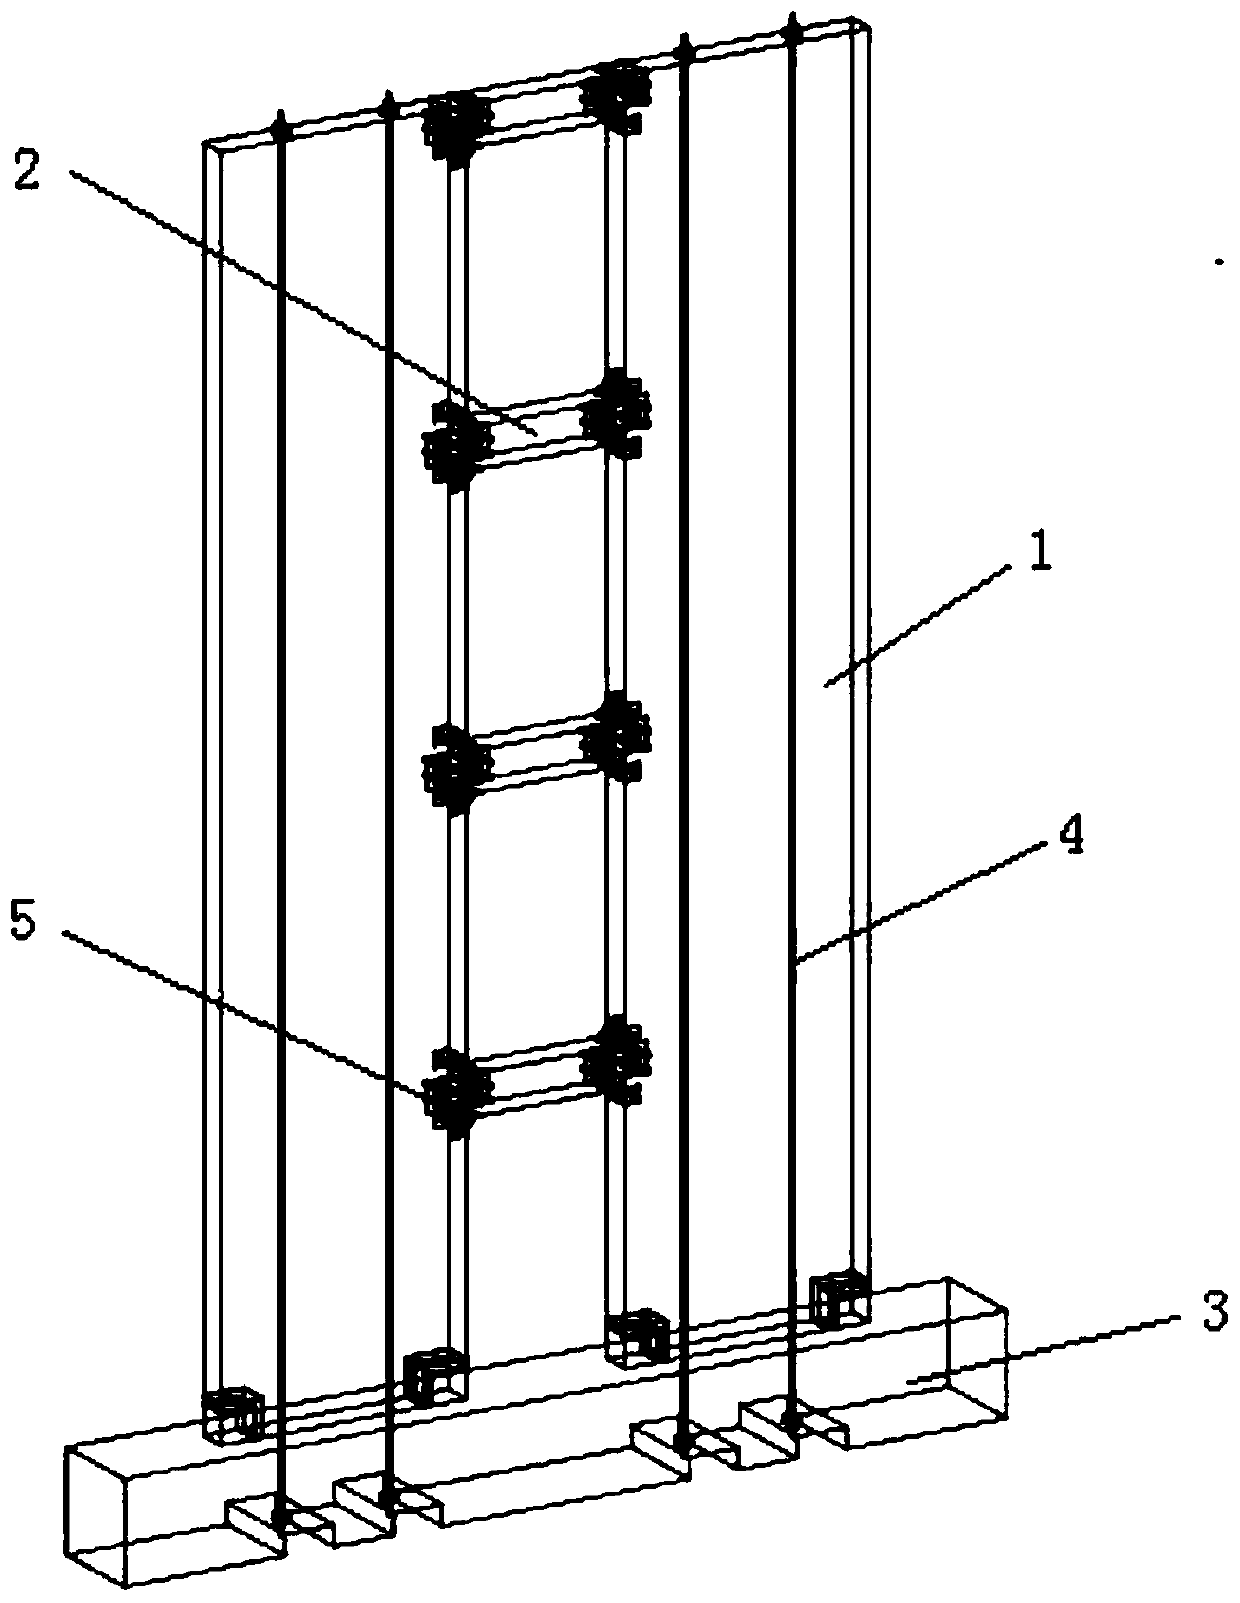 A swingable and self-resetting prestressed cross-laminated timber combined shear wall